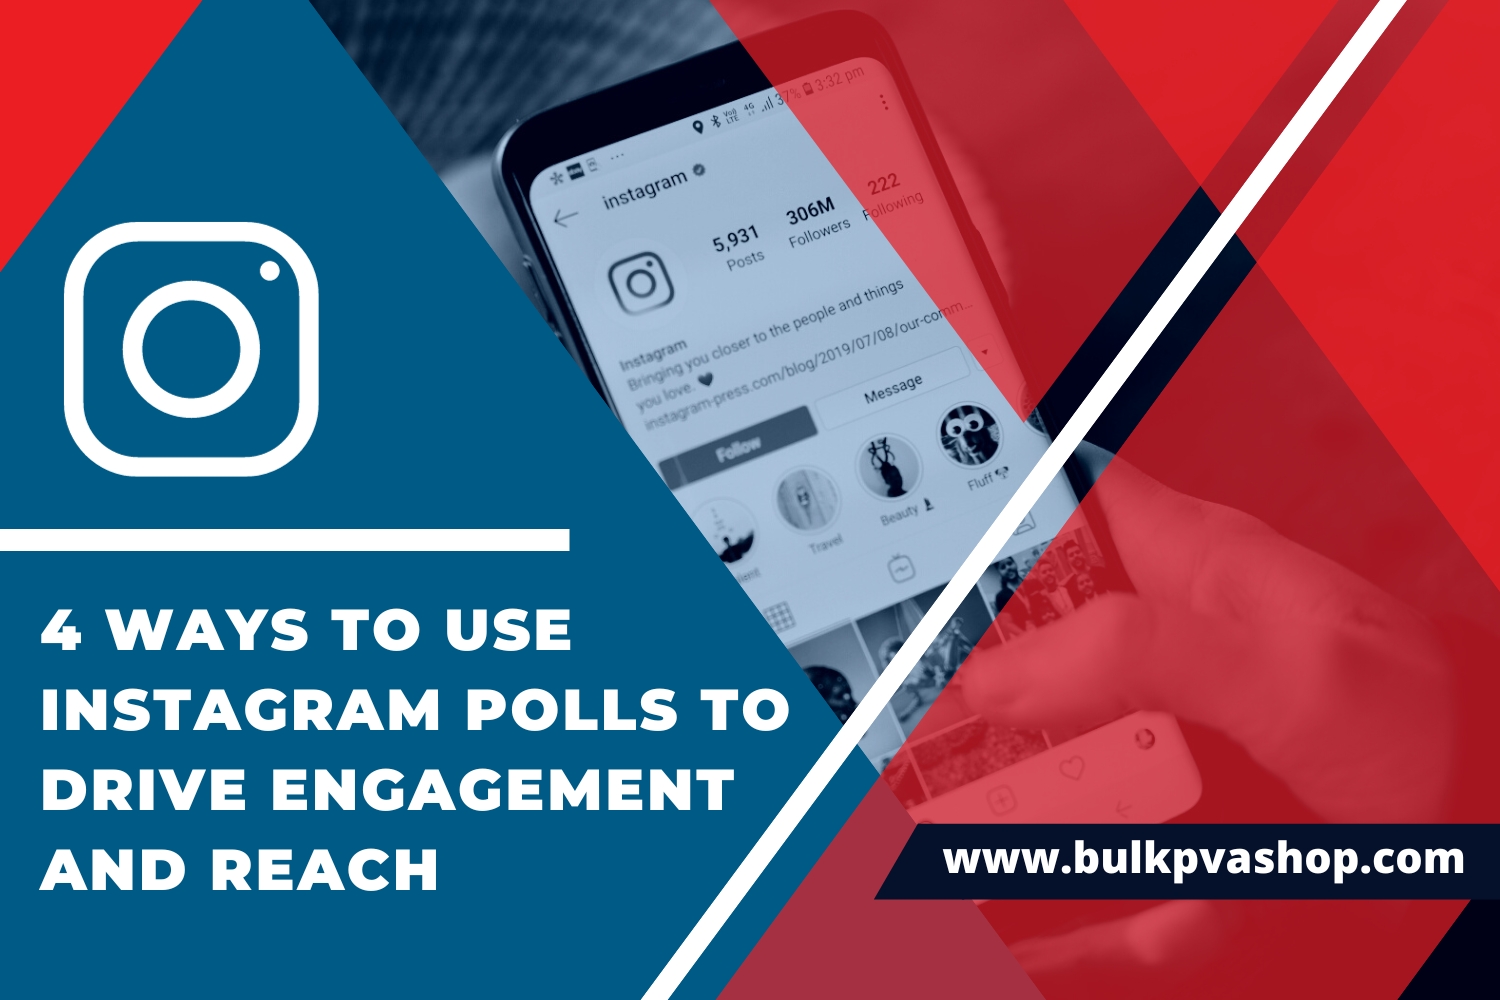 4 Ways to Use Instagram Polls to Drive Engagement and Reach